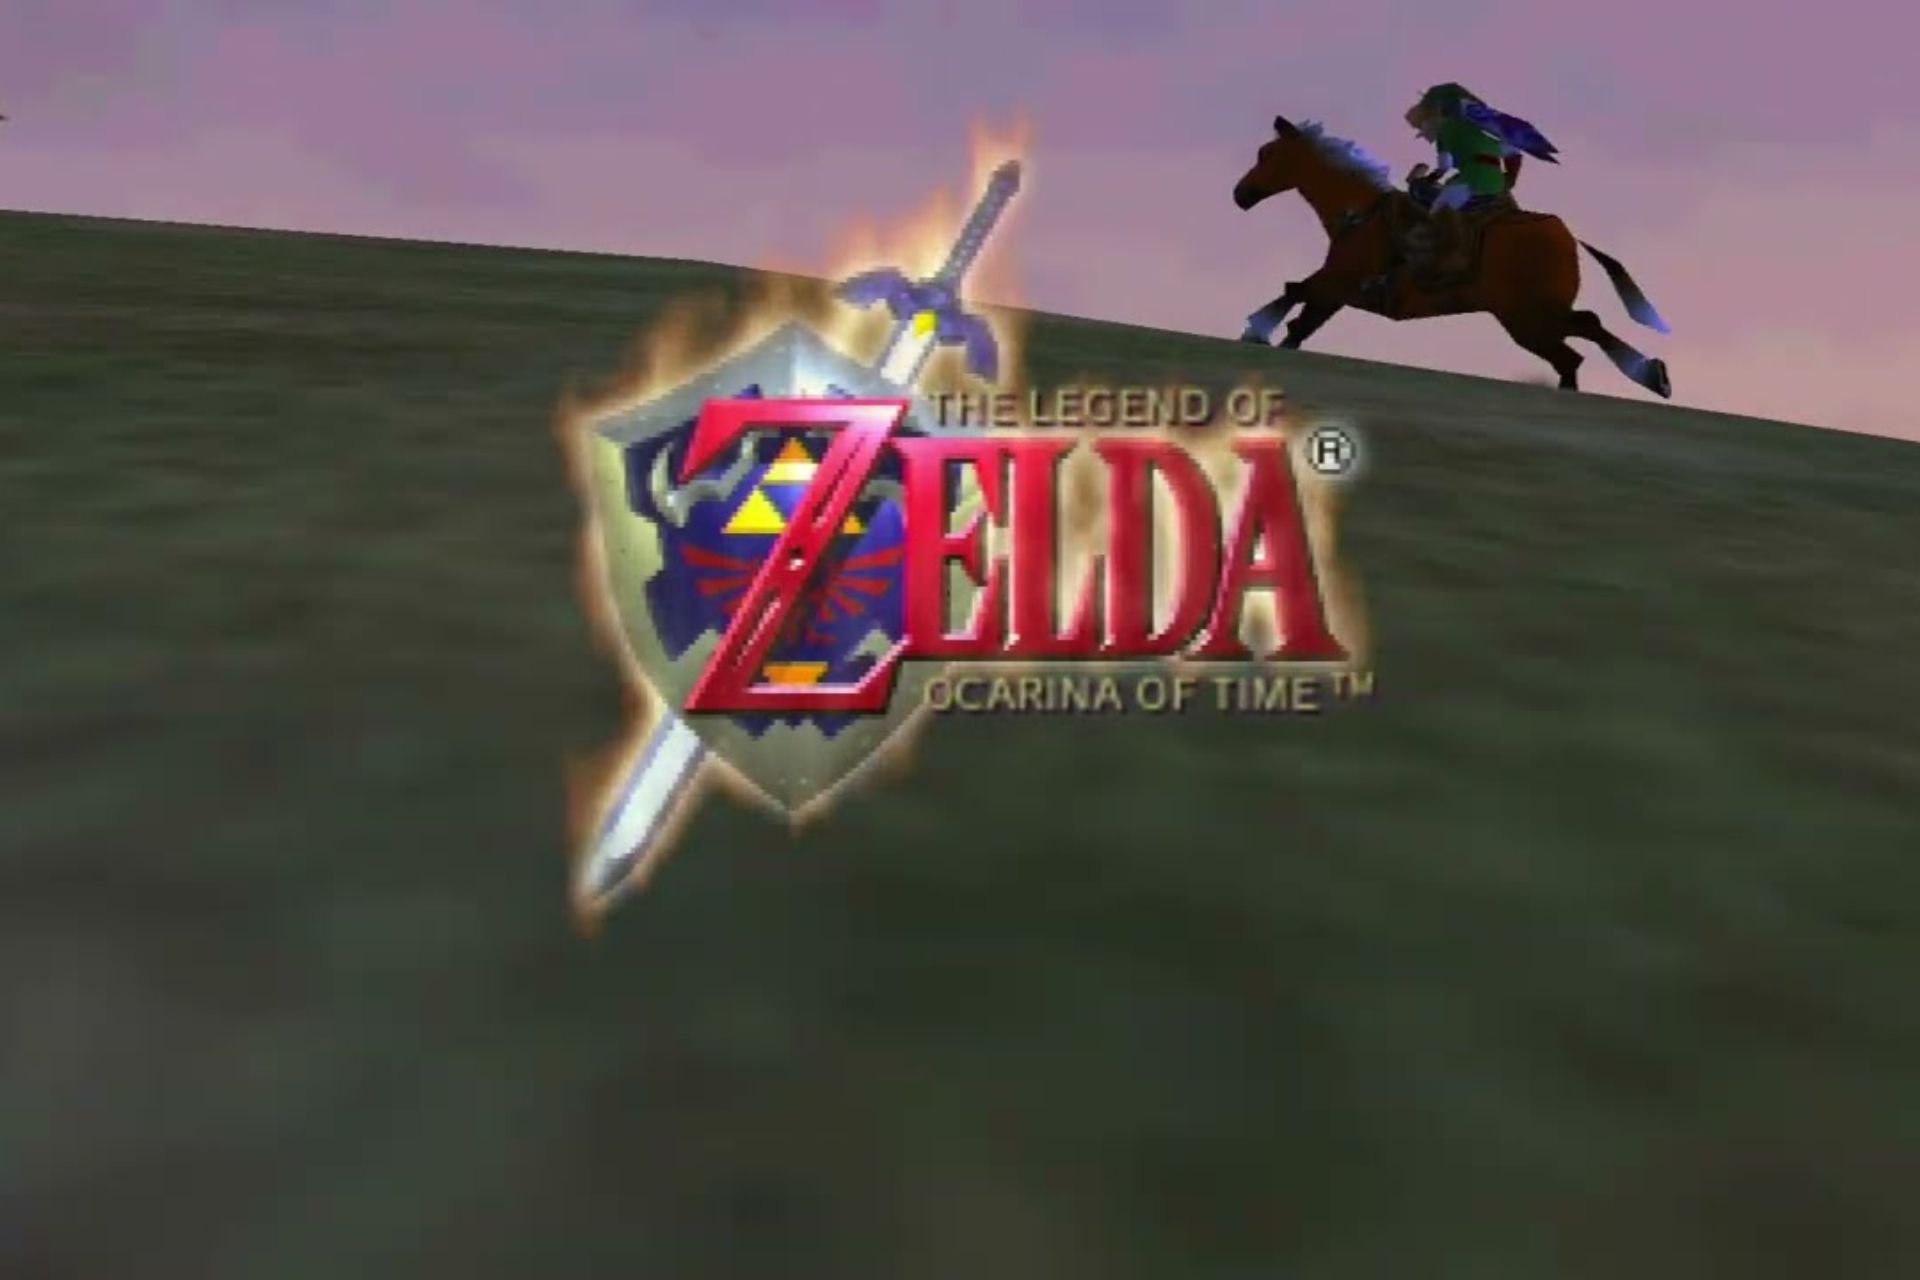 Nintendo classic 'Zelda: A Link to the Past' gets an unofficial PC port